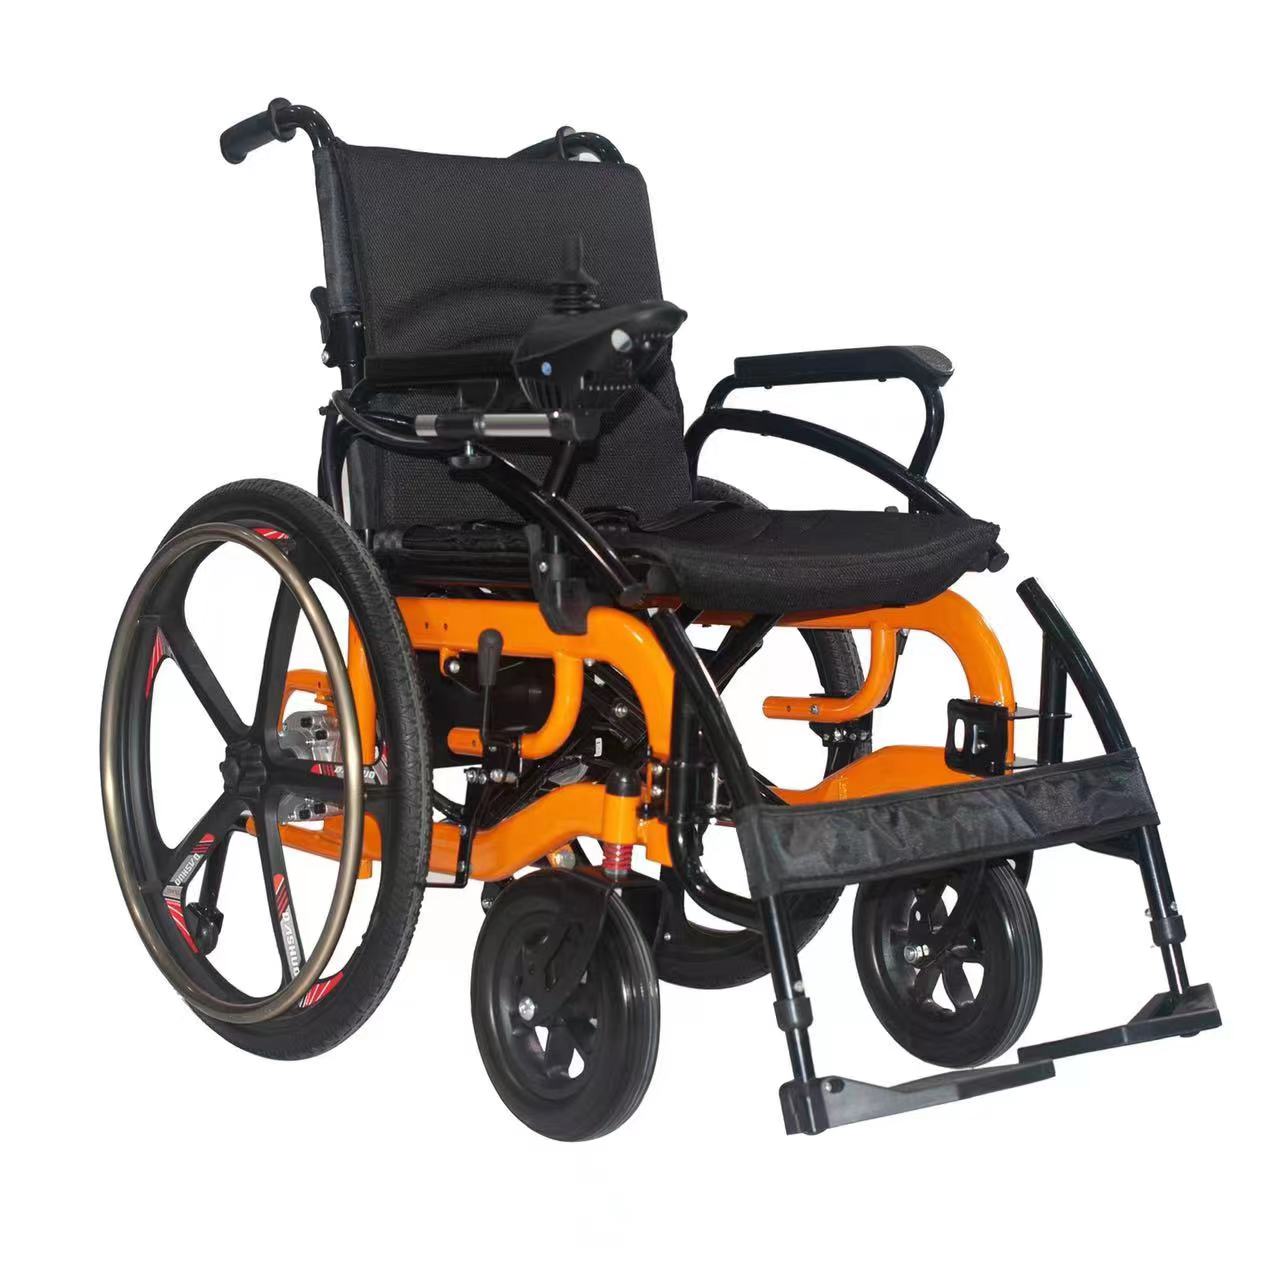 What are the precautions when buying wheelchair？